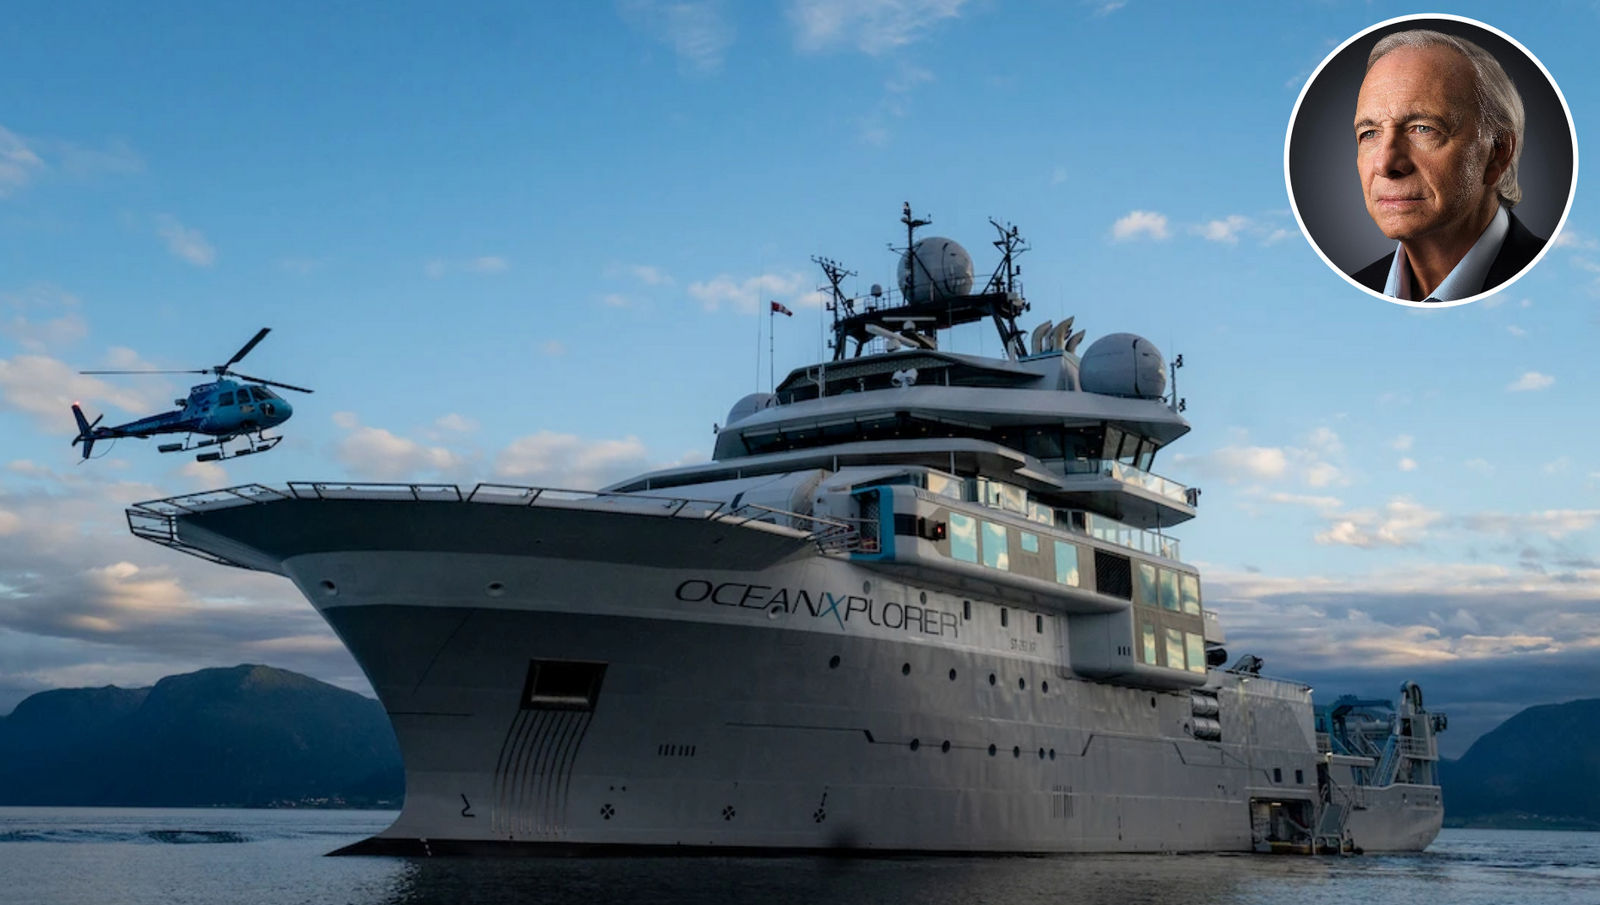 Formula 1 ace Lewis Hamilton and Olympic snowboarder Shaun White had the  time of their lives exploring the icy waters of Antarctica onboard Paul  Allen's Octopus superyacht, which costs $2.2 million a